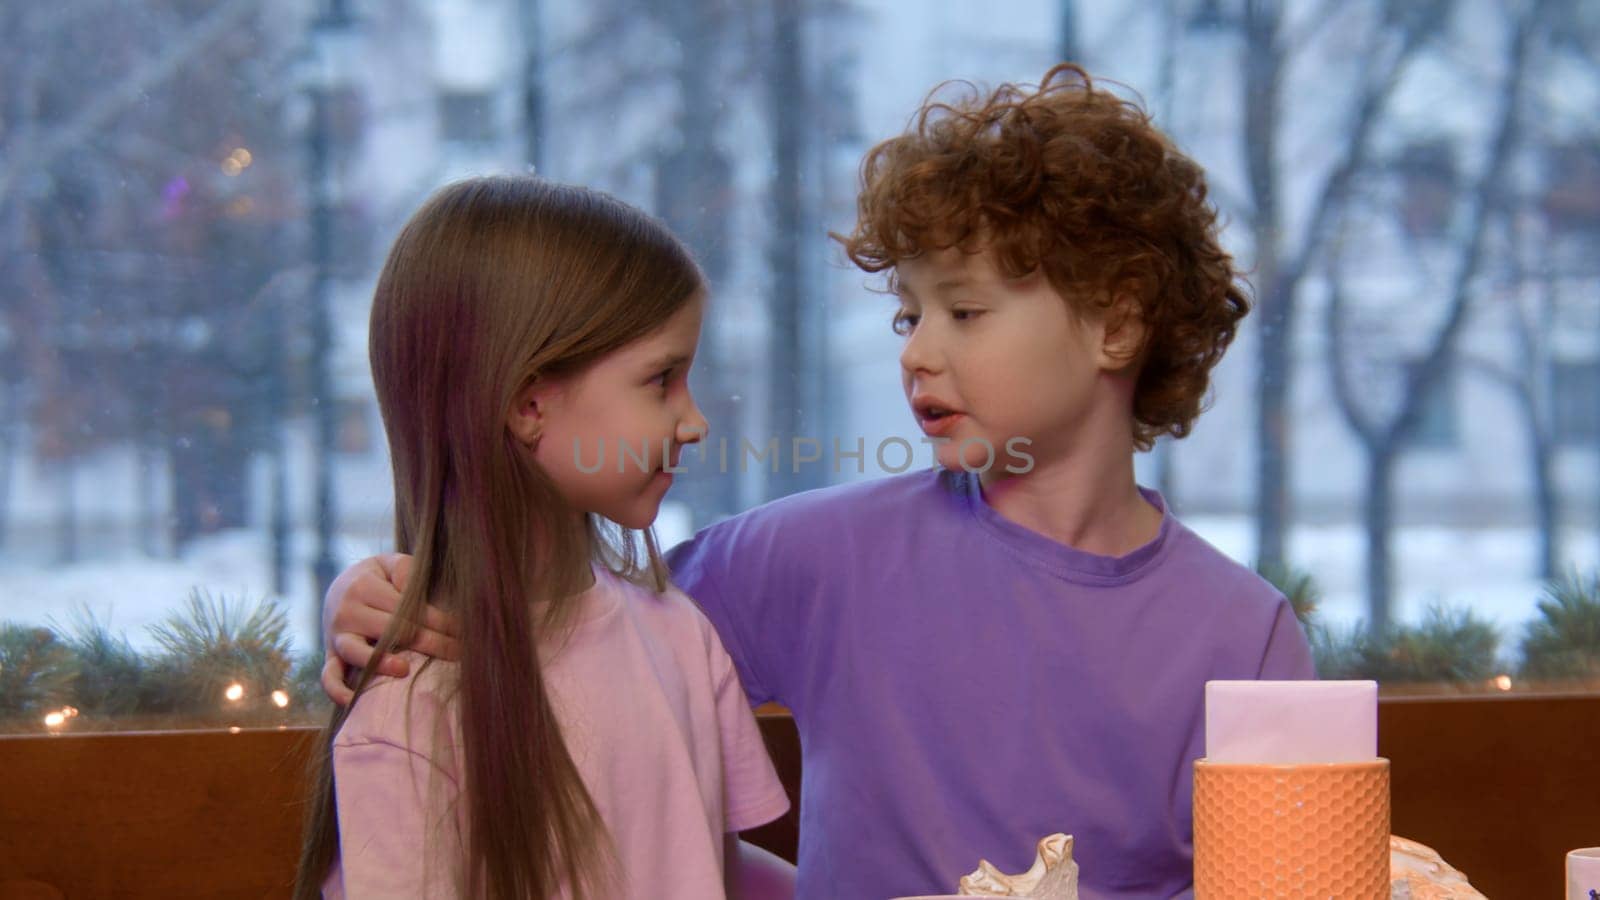 Children sitting together at a table in a restaurant. Stock footage. Brother with red curly hair putting ihs arm around the shoulders of her cute sister